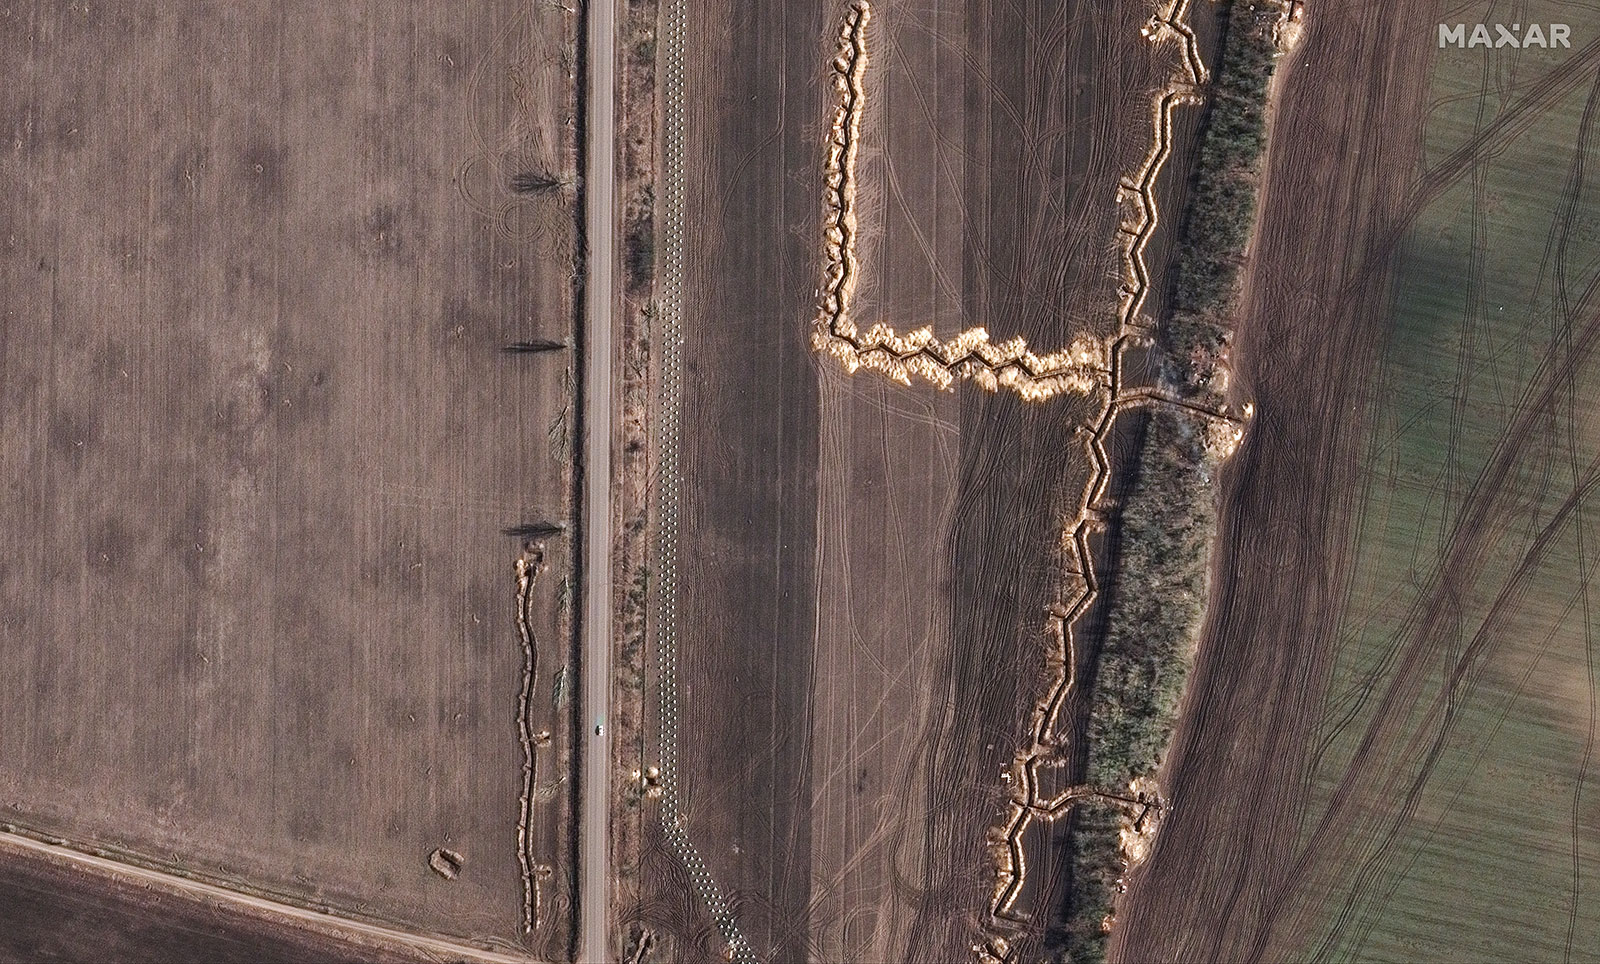 Three rows of dragon's teeth and trenches, east of Vasylivka, Zaporizhzhia -- March 4.